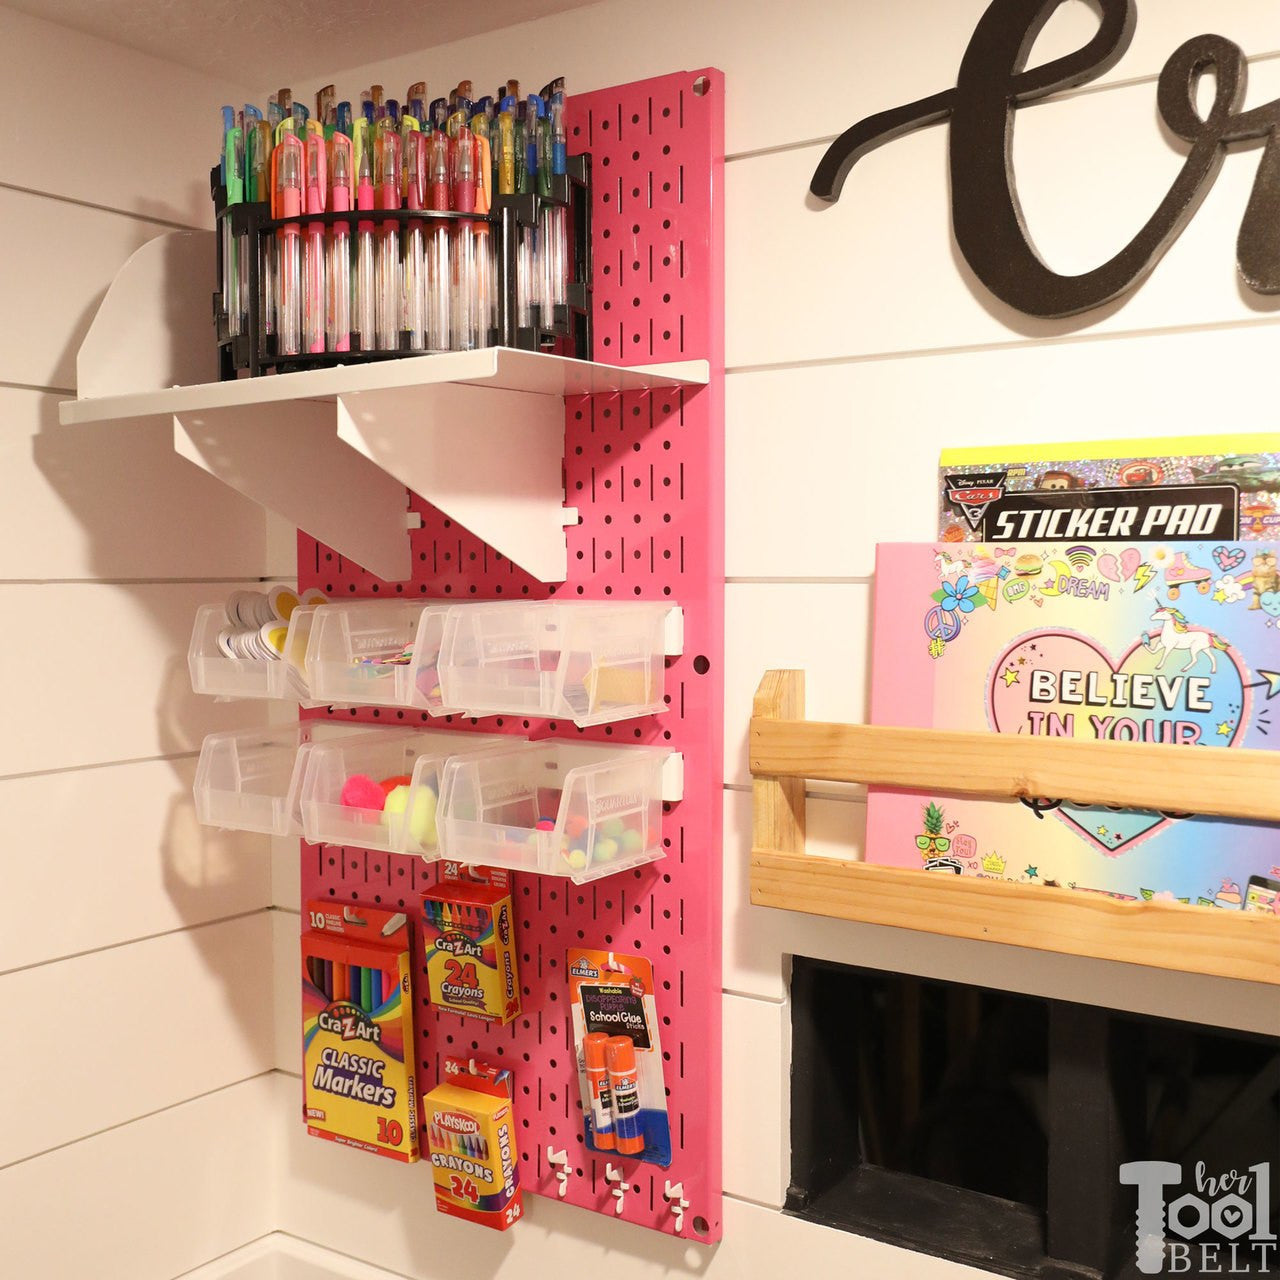 Her Tool Belt - Kids Craft Room with Pink Pegboard